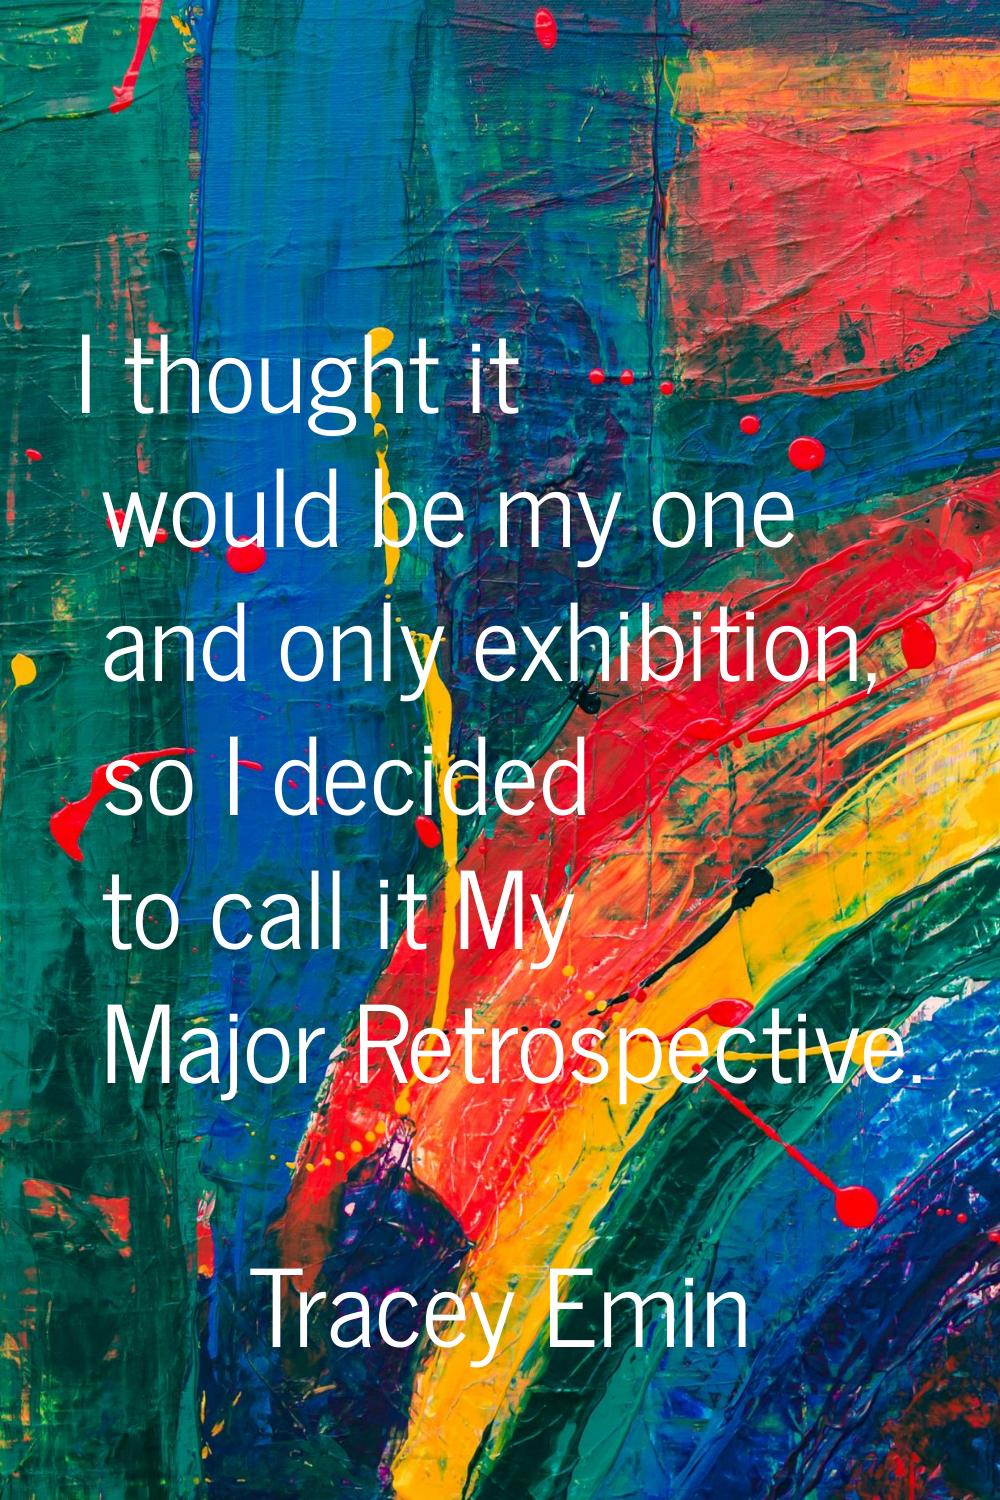 I thought it would be my one and only exhibition, so I decided to call it My Major Retrospective.